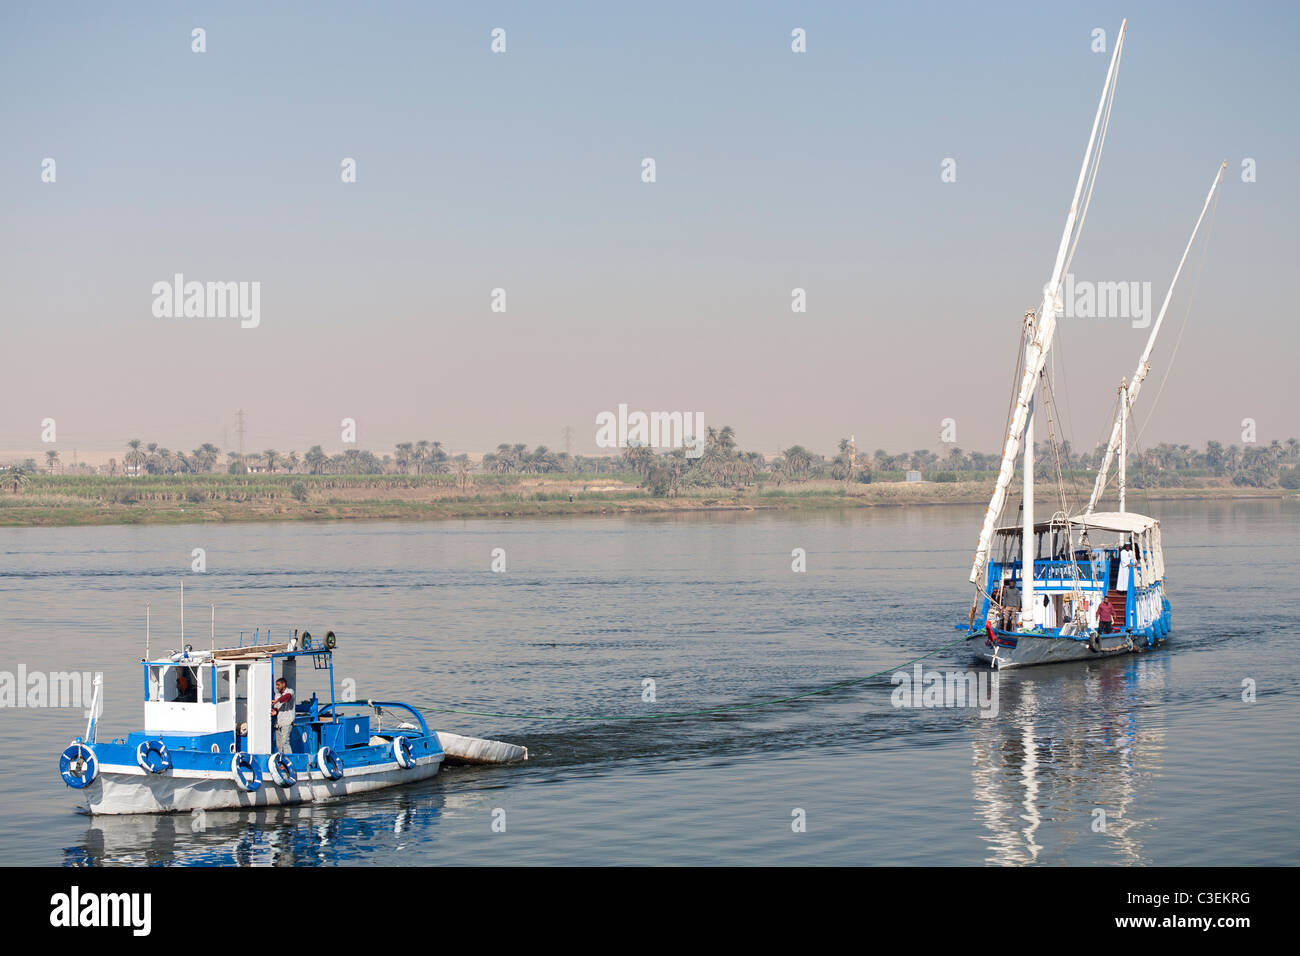 A dahabiya being towed by small craft to its mooring on the banks of the river Nile in calm water, Egypt, Africa Stock Photo